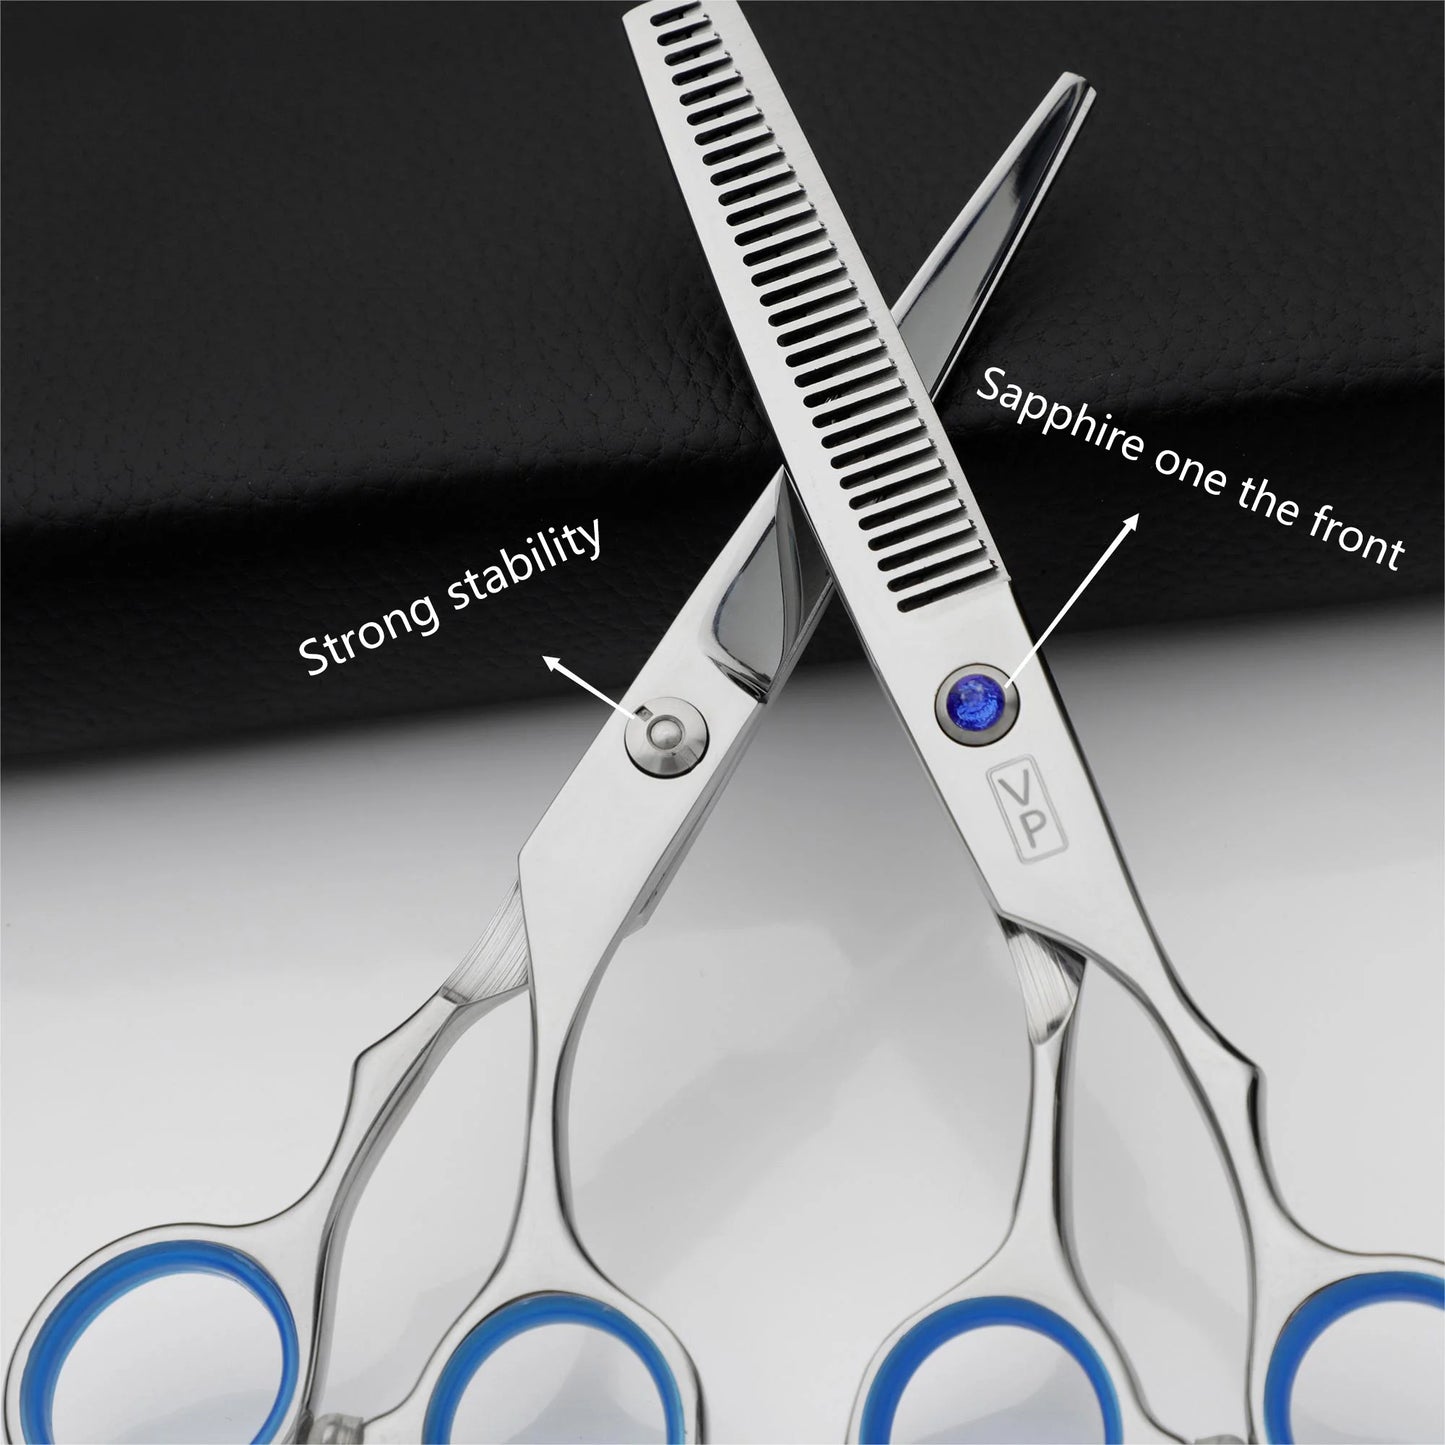 Professional Hairdressing Haircut Scissors